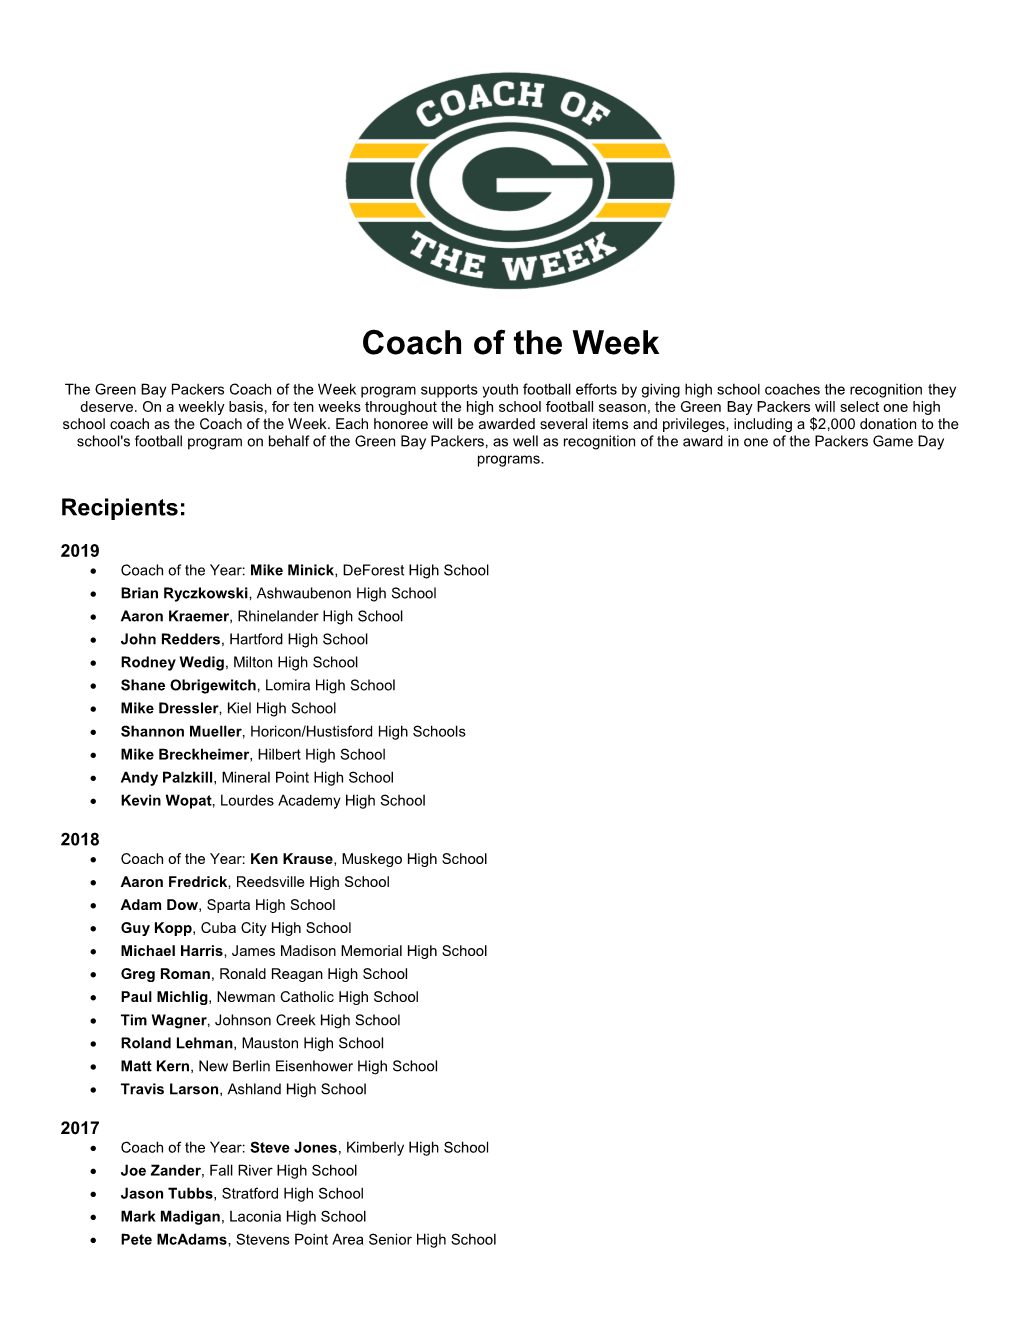 Coach of the Week Recipients